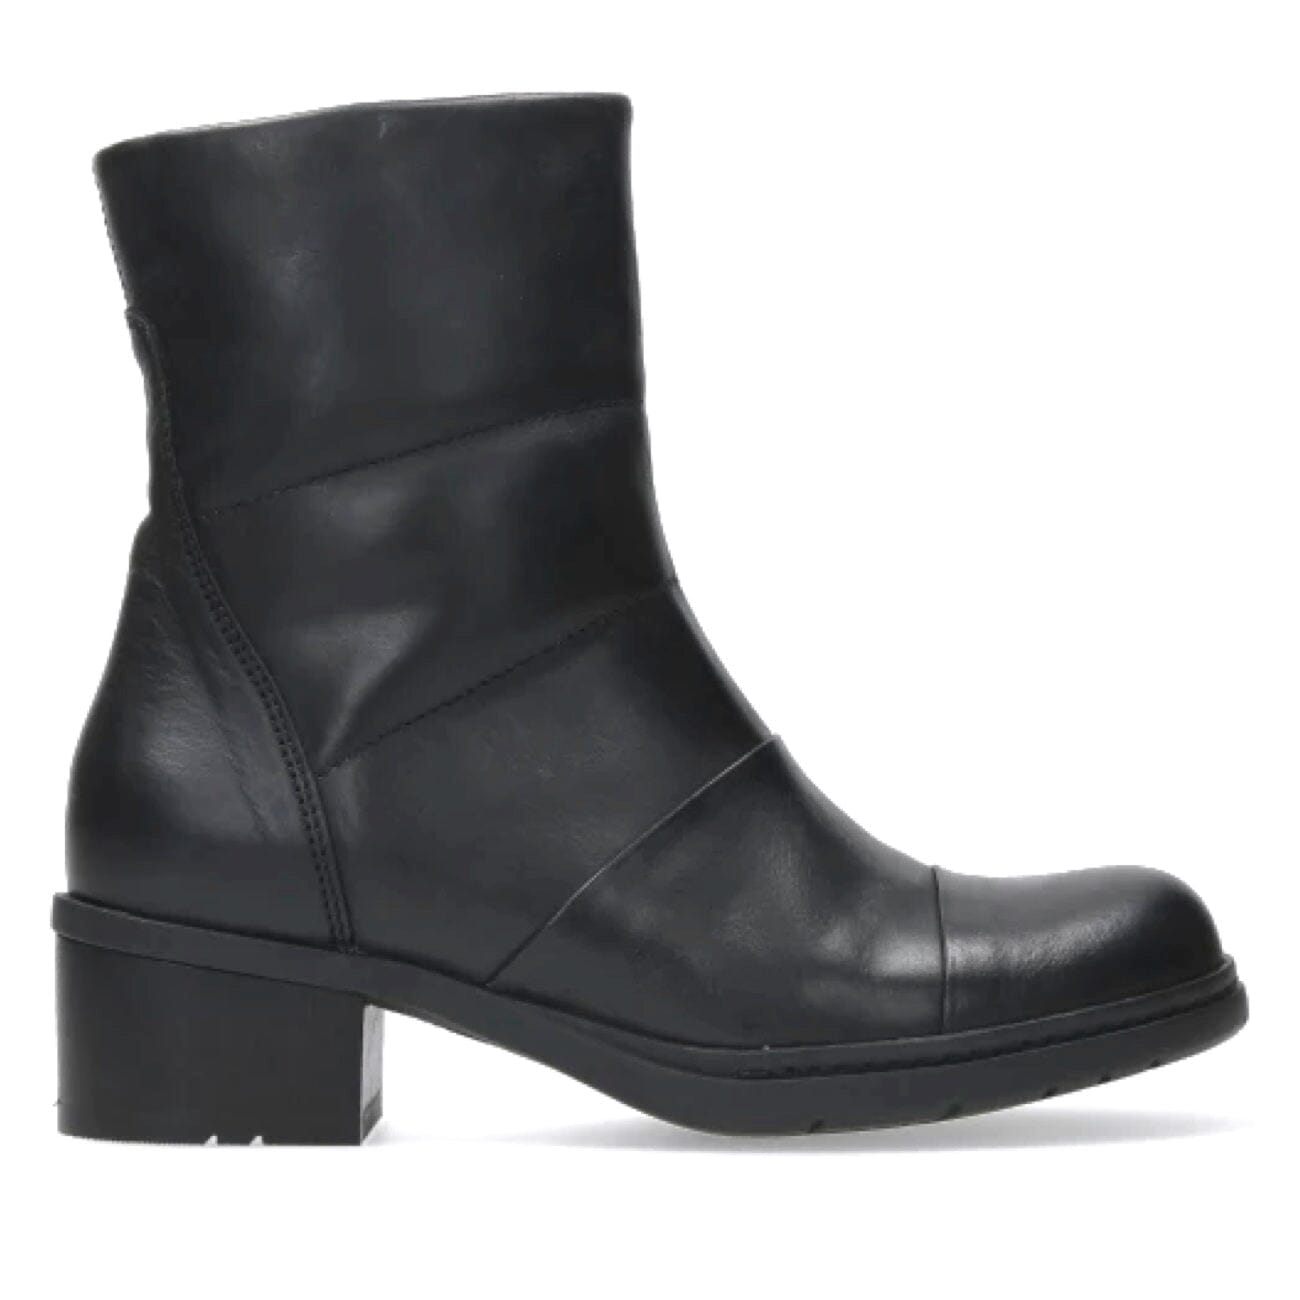 Wolky, Hinton, Boots, Leather, Black Boots Wolky Black 37 